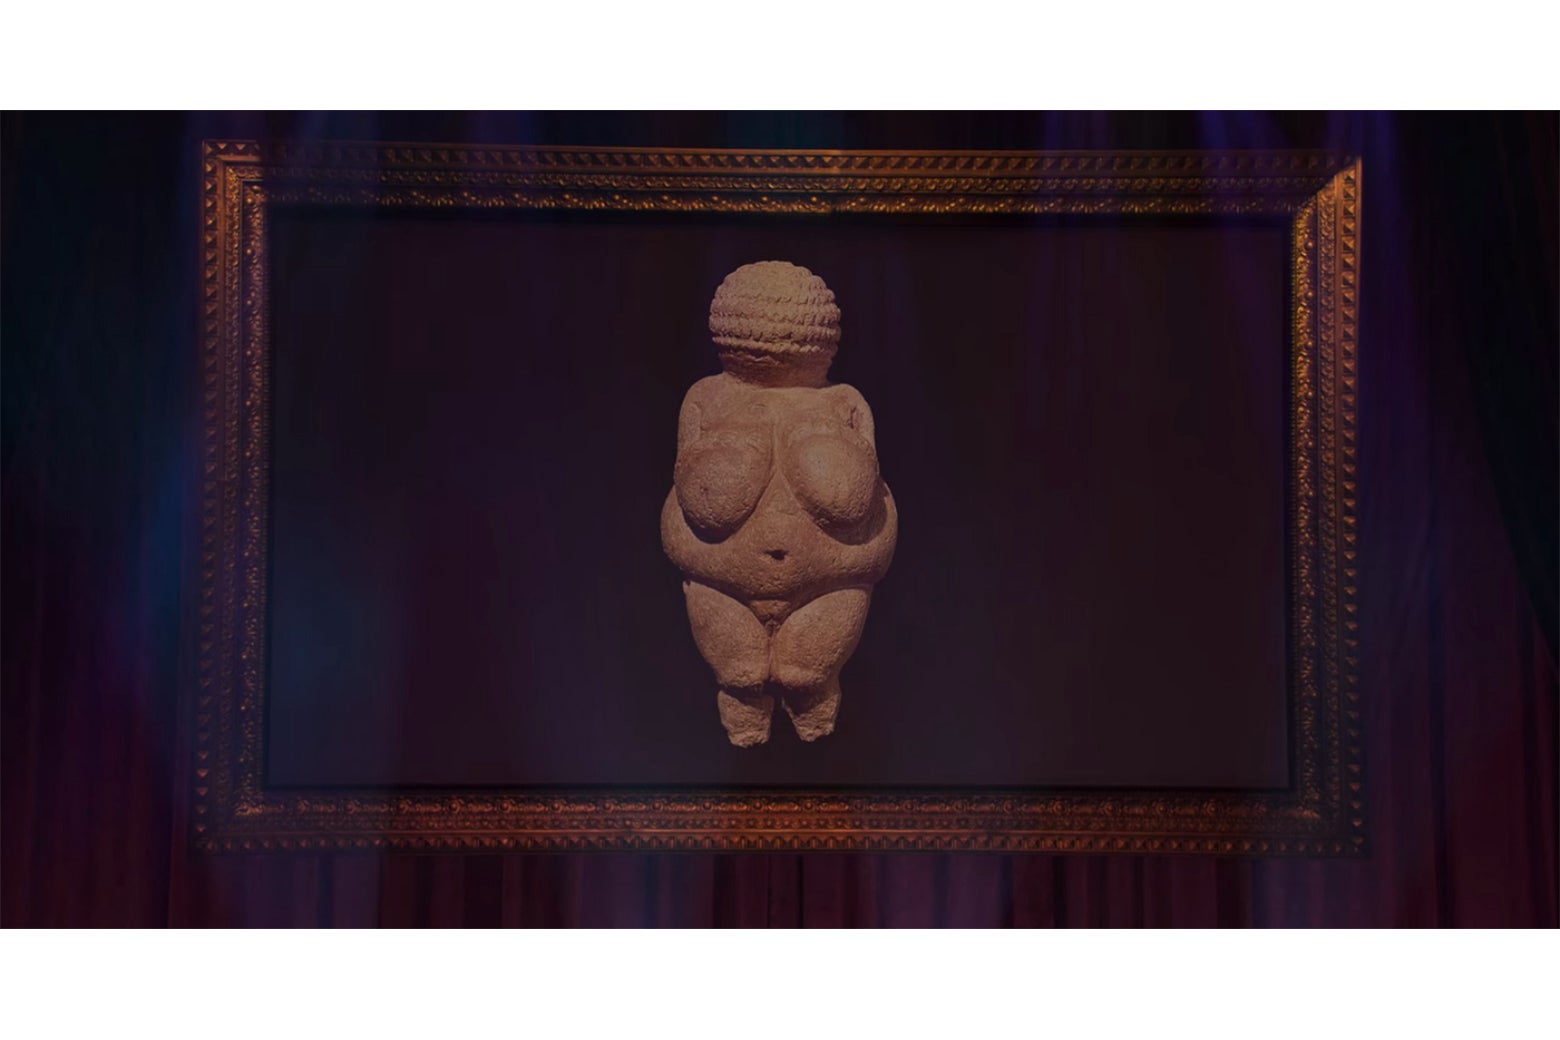 A projection screen from Douglas displaying an image of a paleolithic Venus figurine.